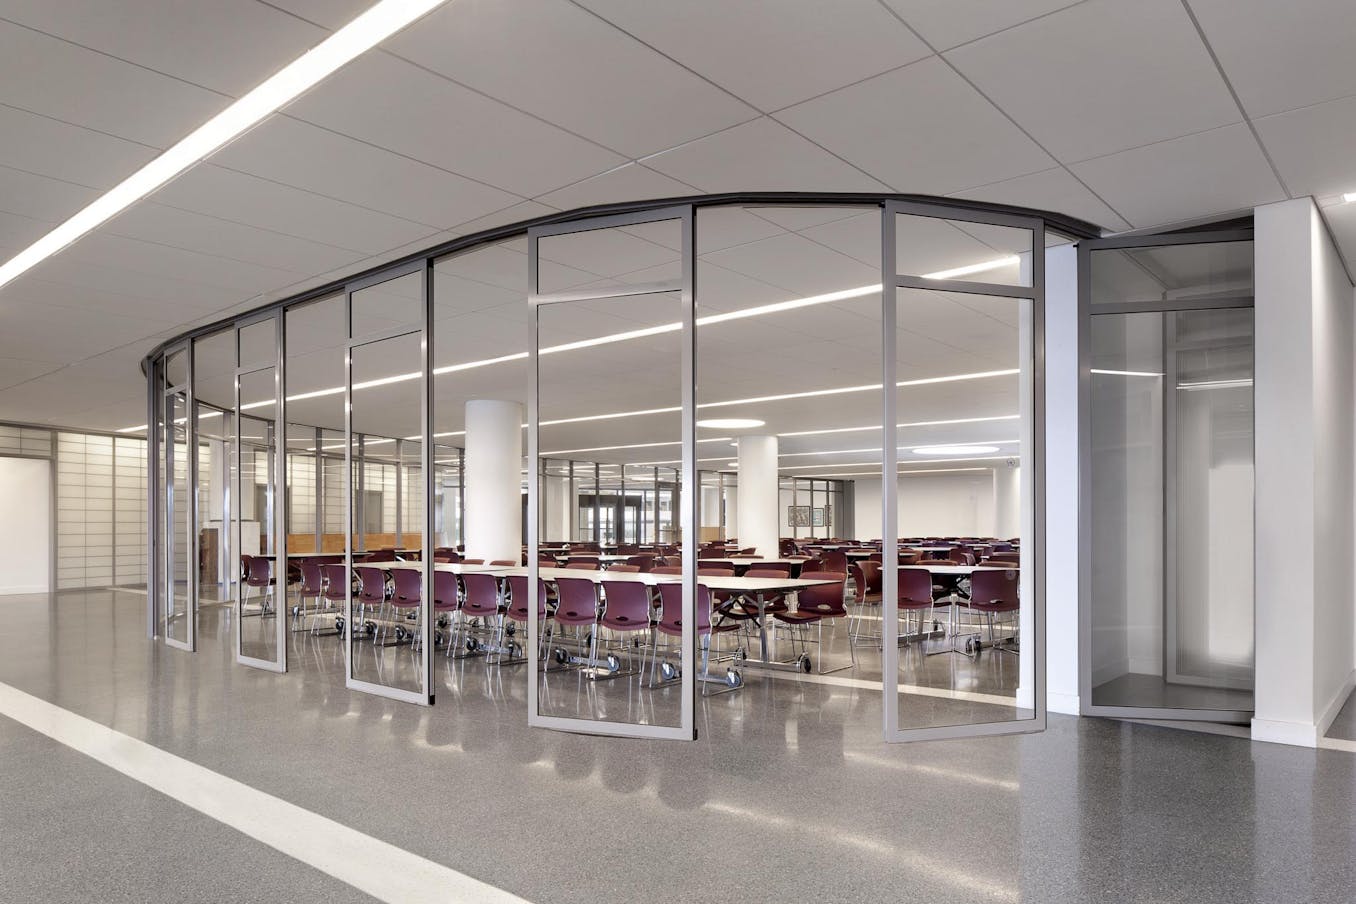 commercial collaborative learning space in school design - segmented curved sliding walls opening exterior 